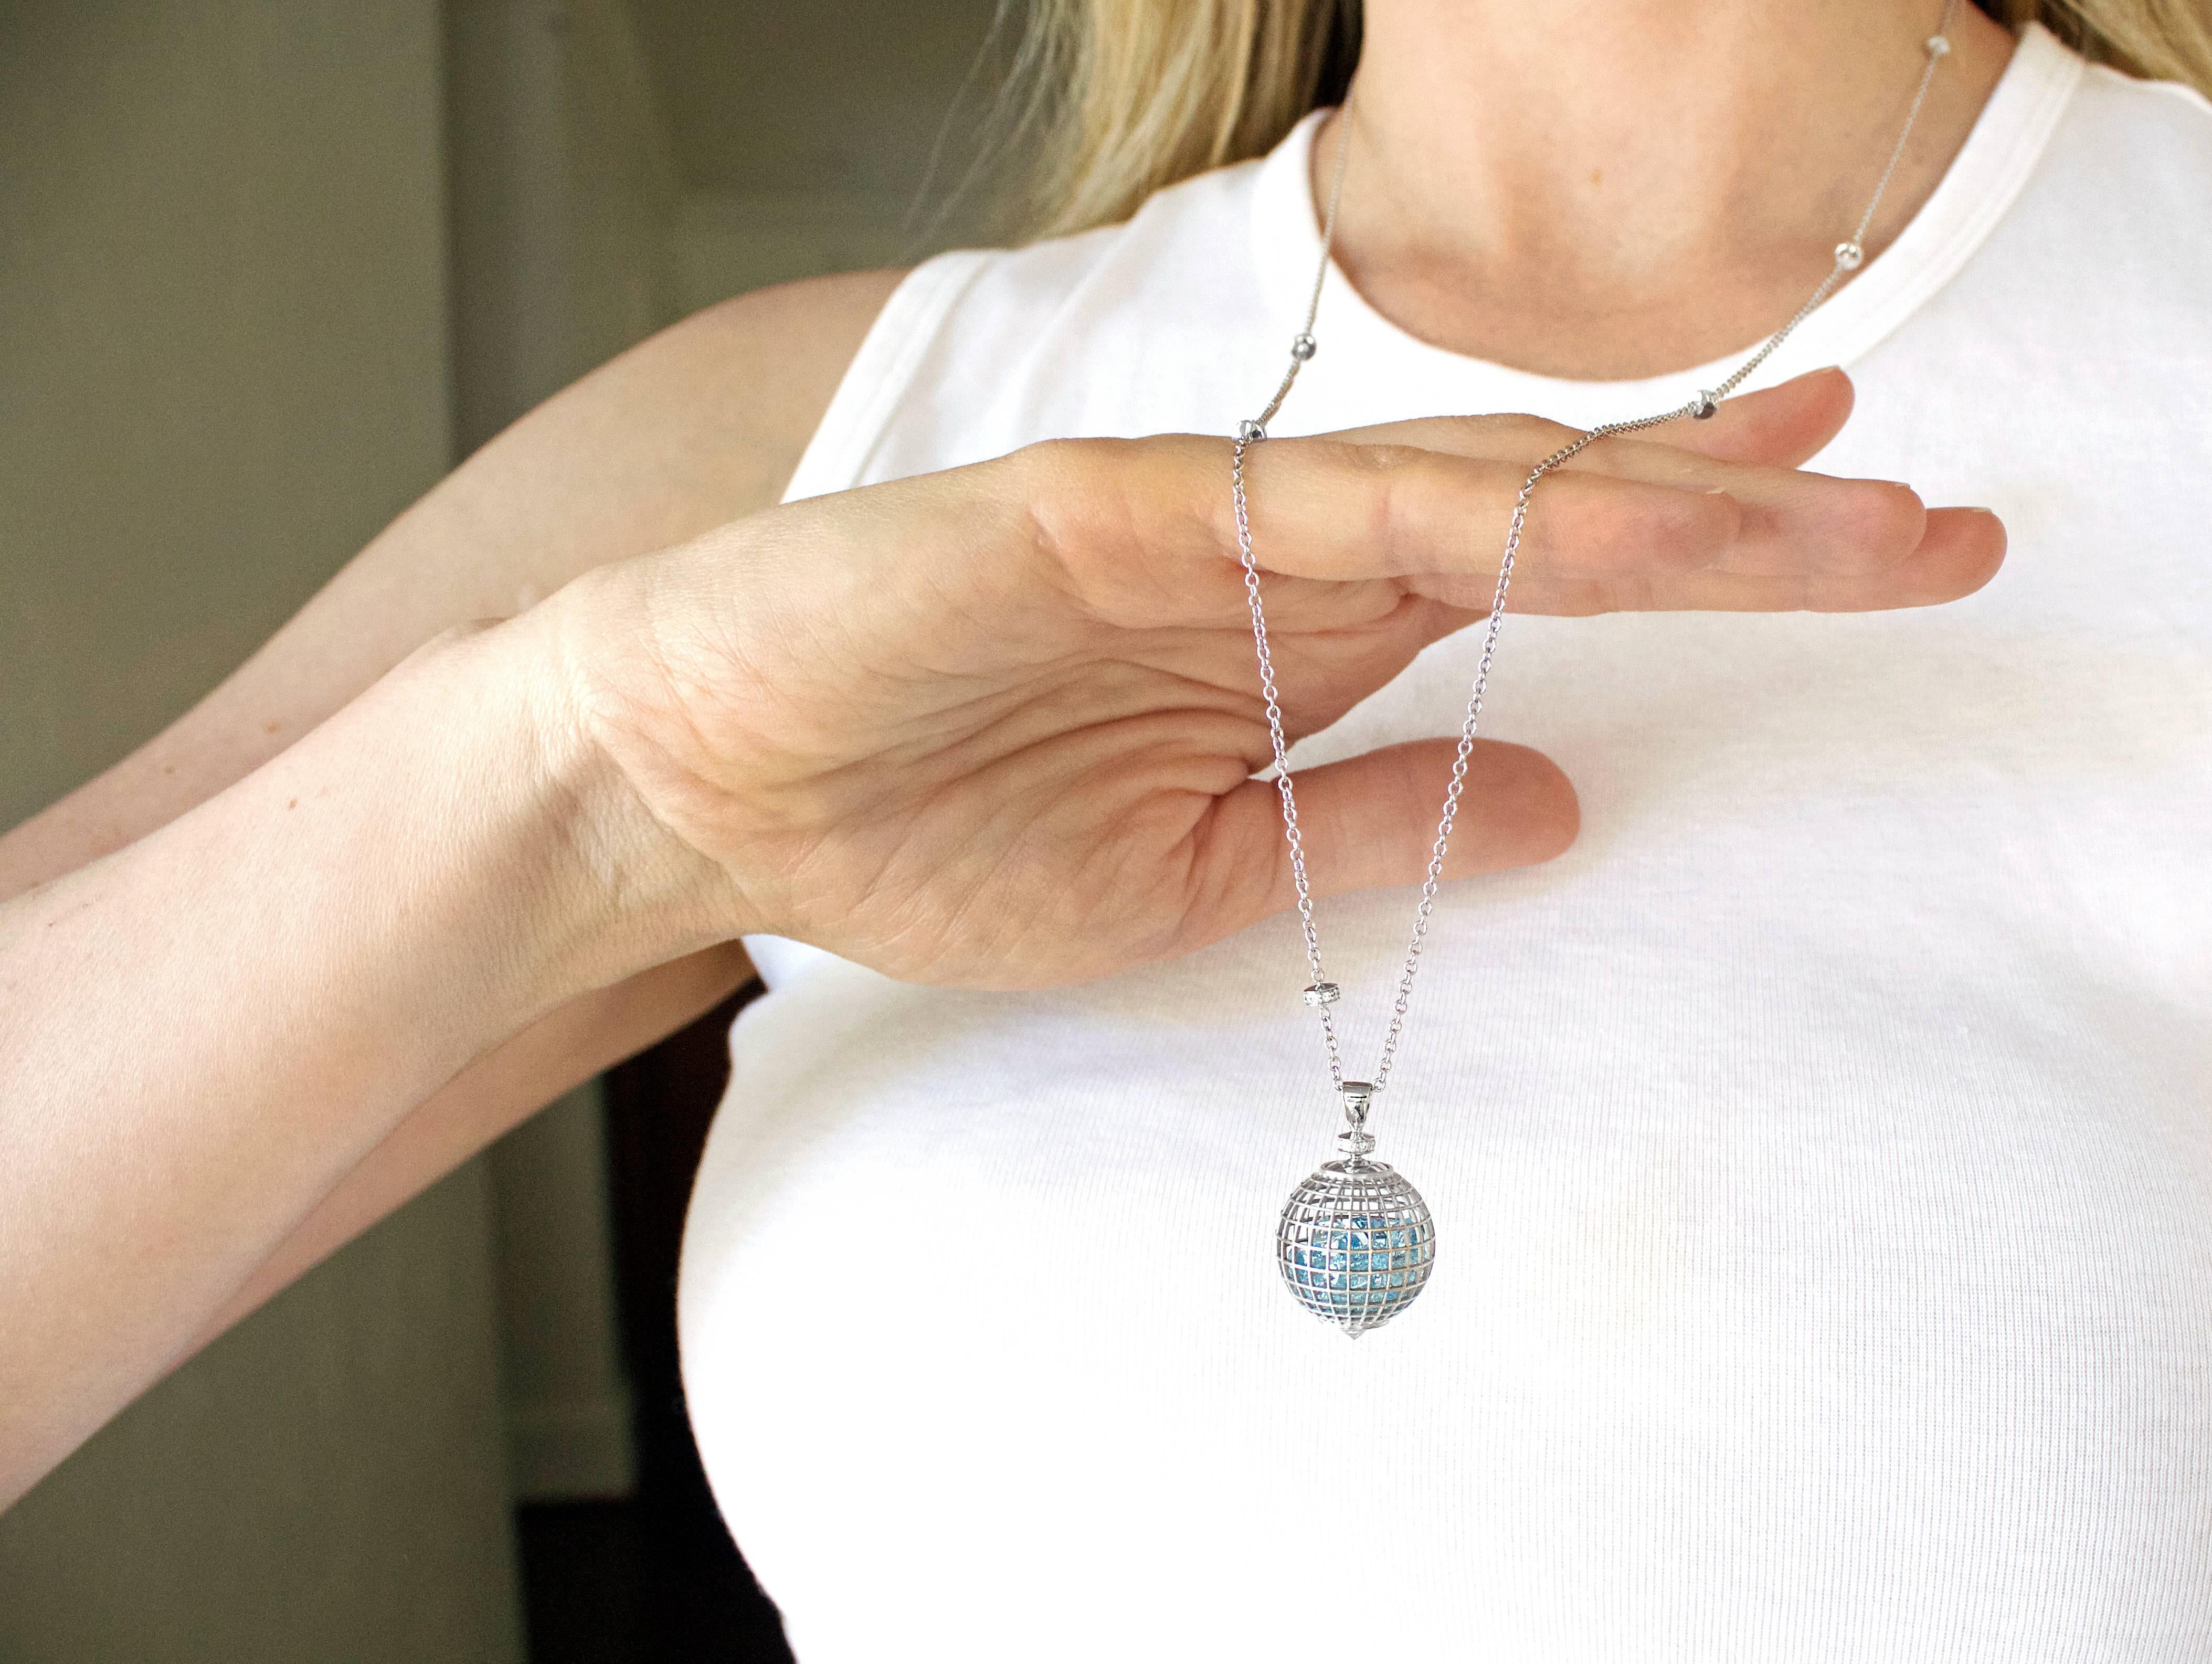 Long Shaker Globe Pendant Necklace handmade in New York by jewelry artist Roule and Co. in 18k white gold with 10.67 total carats of round aquamarine gemstones freely floating inside of open wire sphere and accented with six white diamond rondels